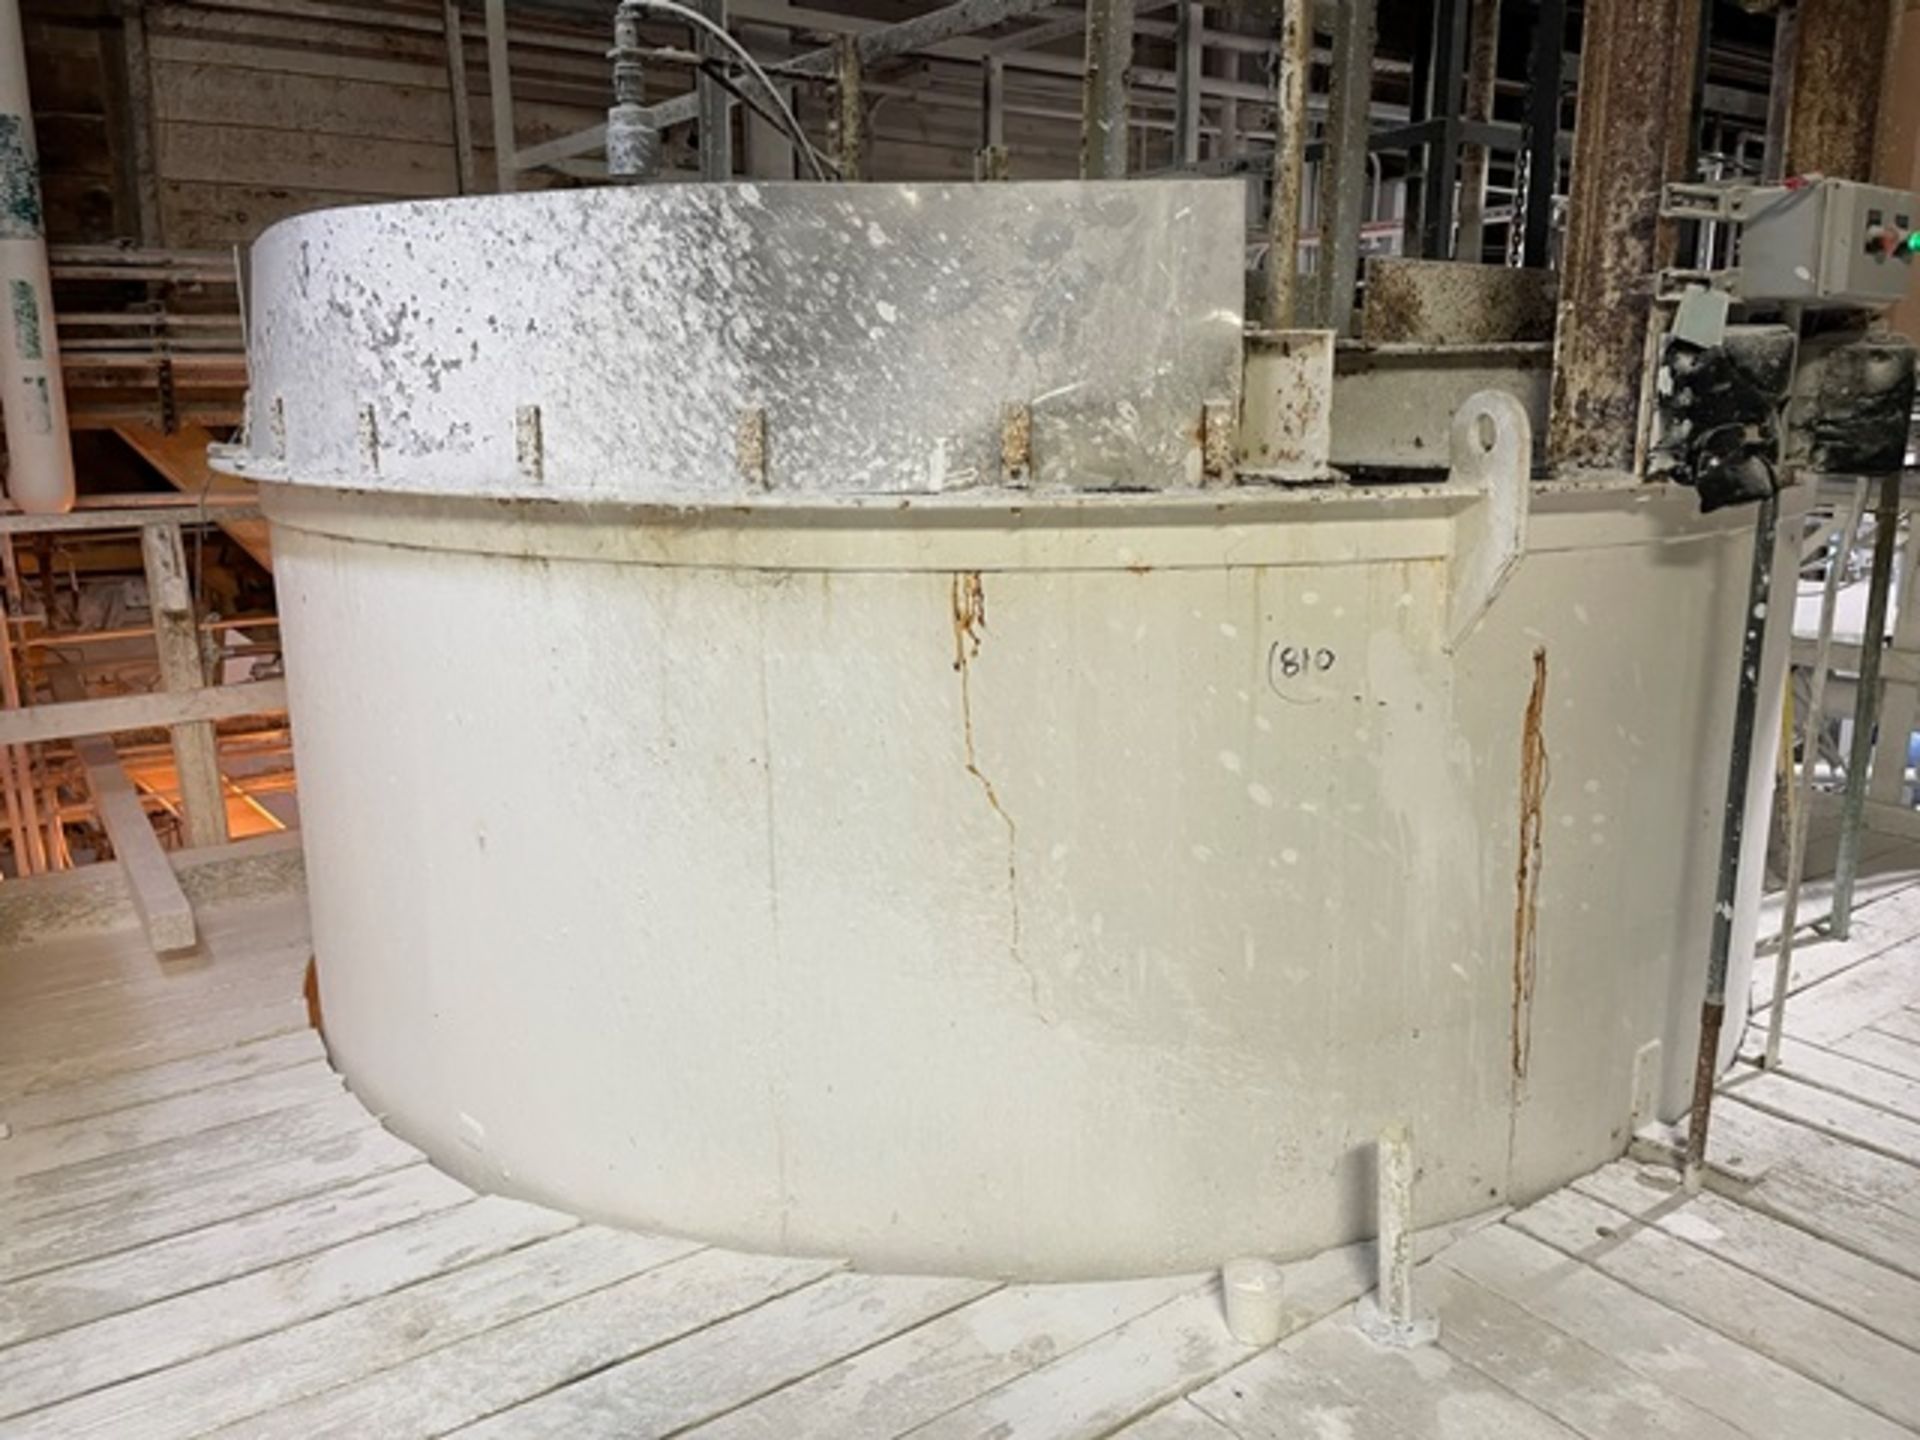 Carbon Steel 6 Degree Lime Tank, 12' Dia. X 18', Includes Mixer